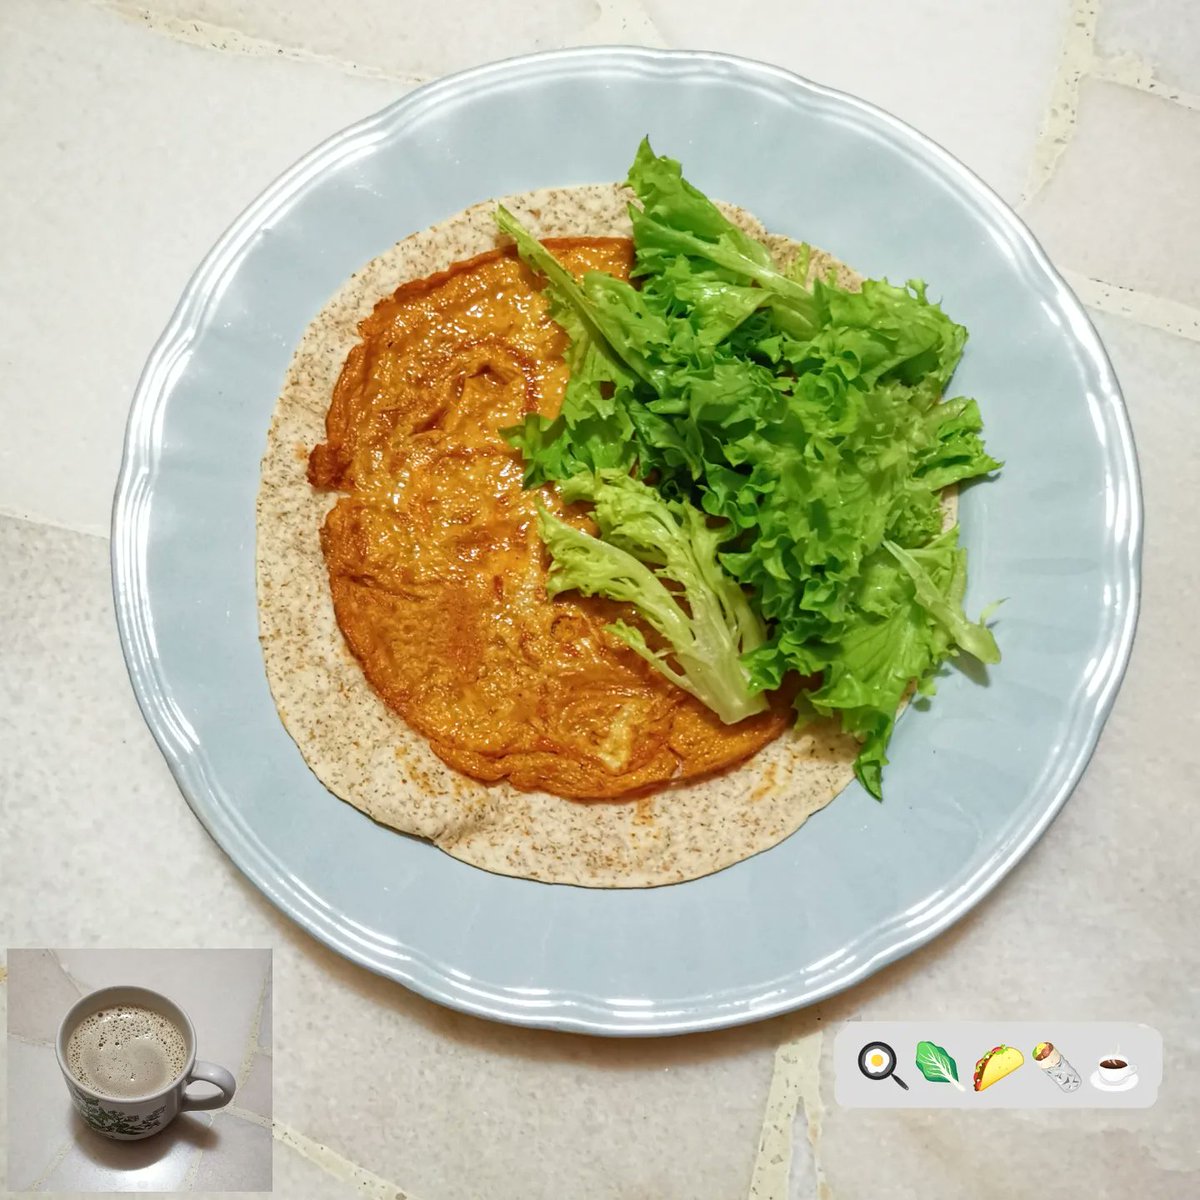 Wrap with omelett and lettuce
#wraps #tortilla #lavash #wholemeal #omelette #ketodiet #healthy #fitness #lifestyle #coffee #tea #chef #StayAtHome #eatathome #abendessen #easyrecipes #CookWithElla21 #料理写真 #おいしい #トルティーヤ #토르티야 #早餐